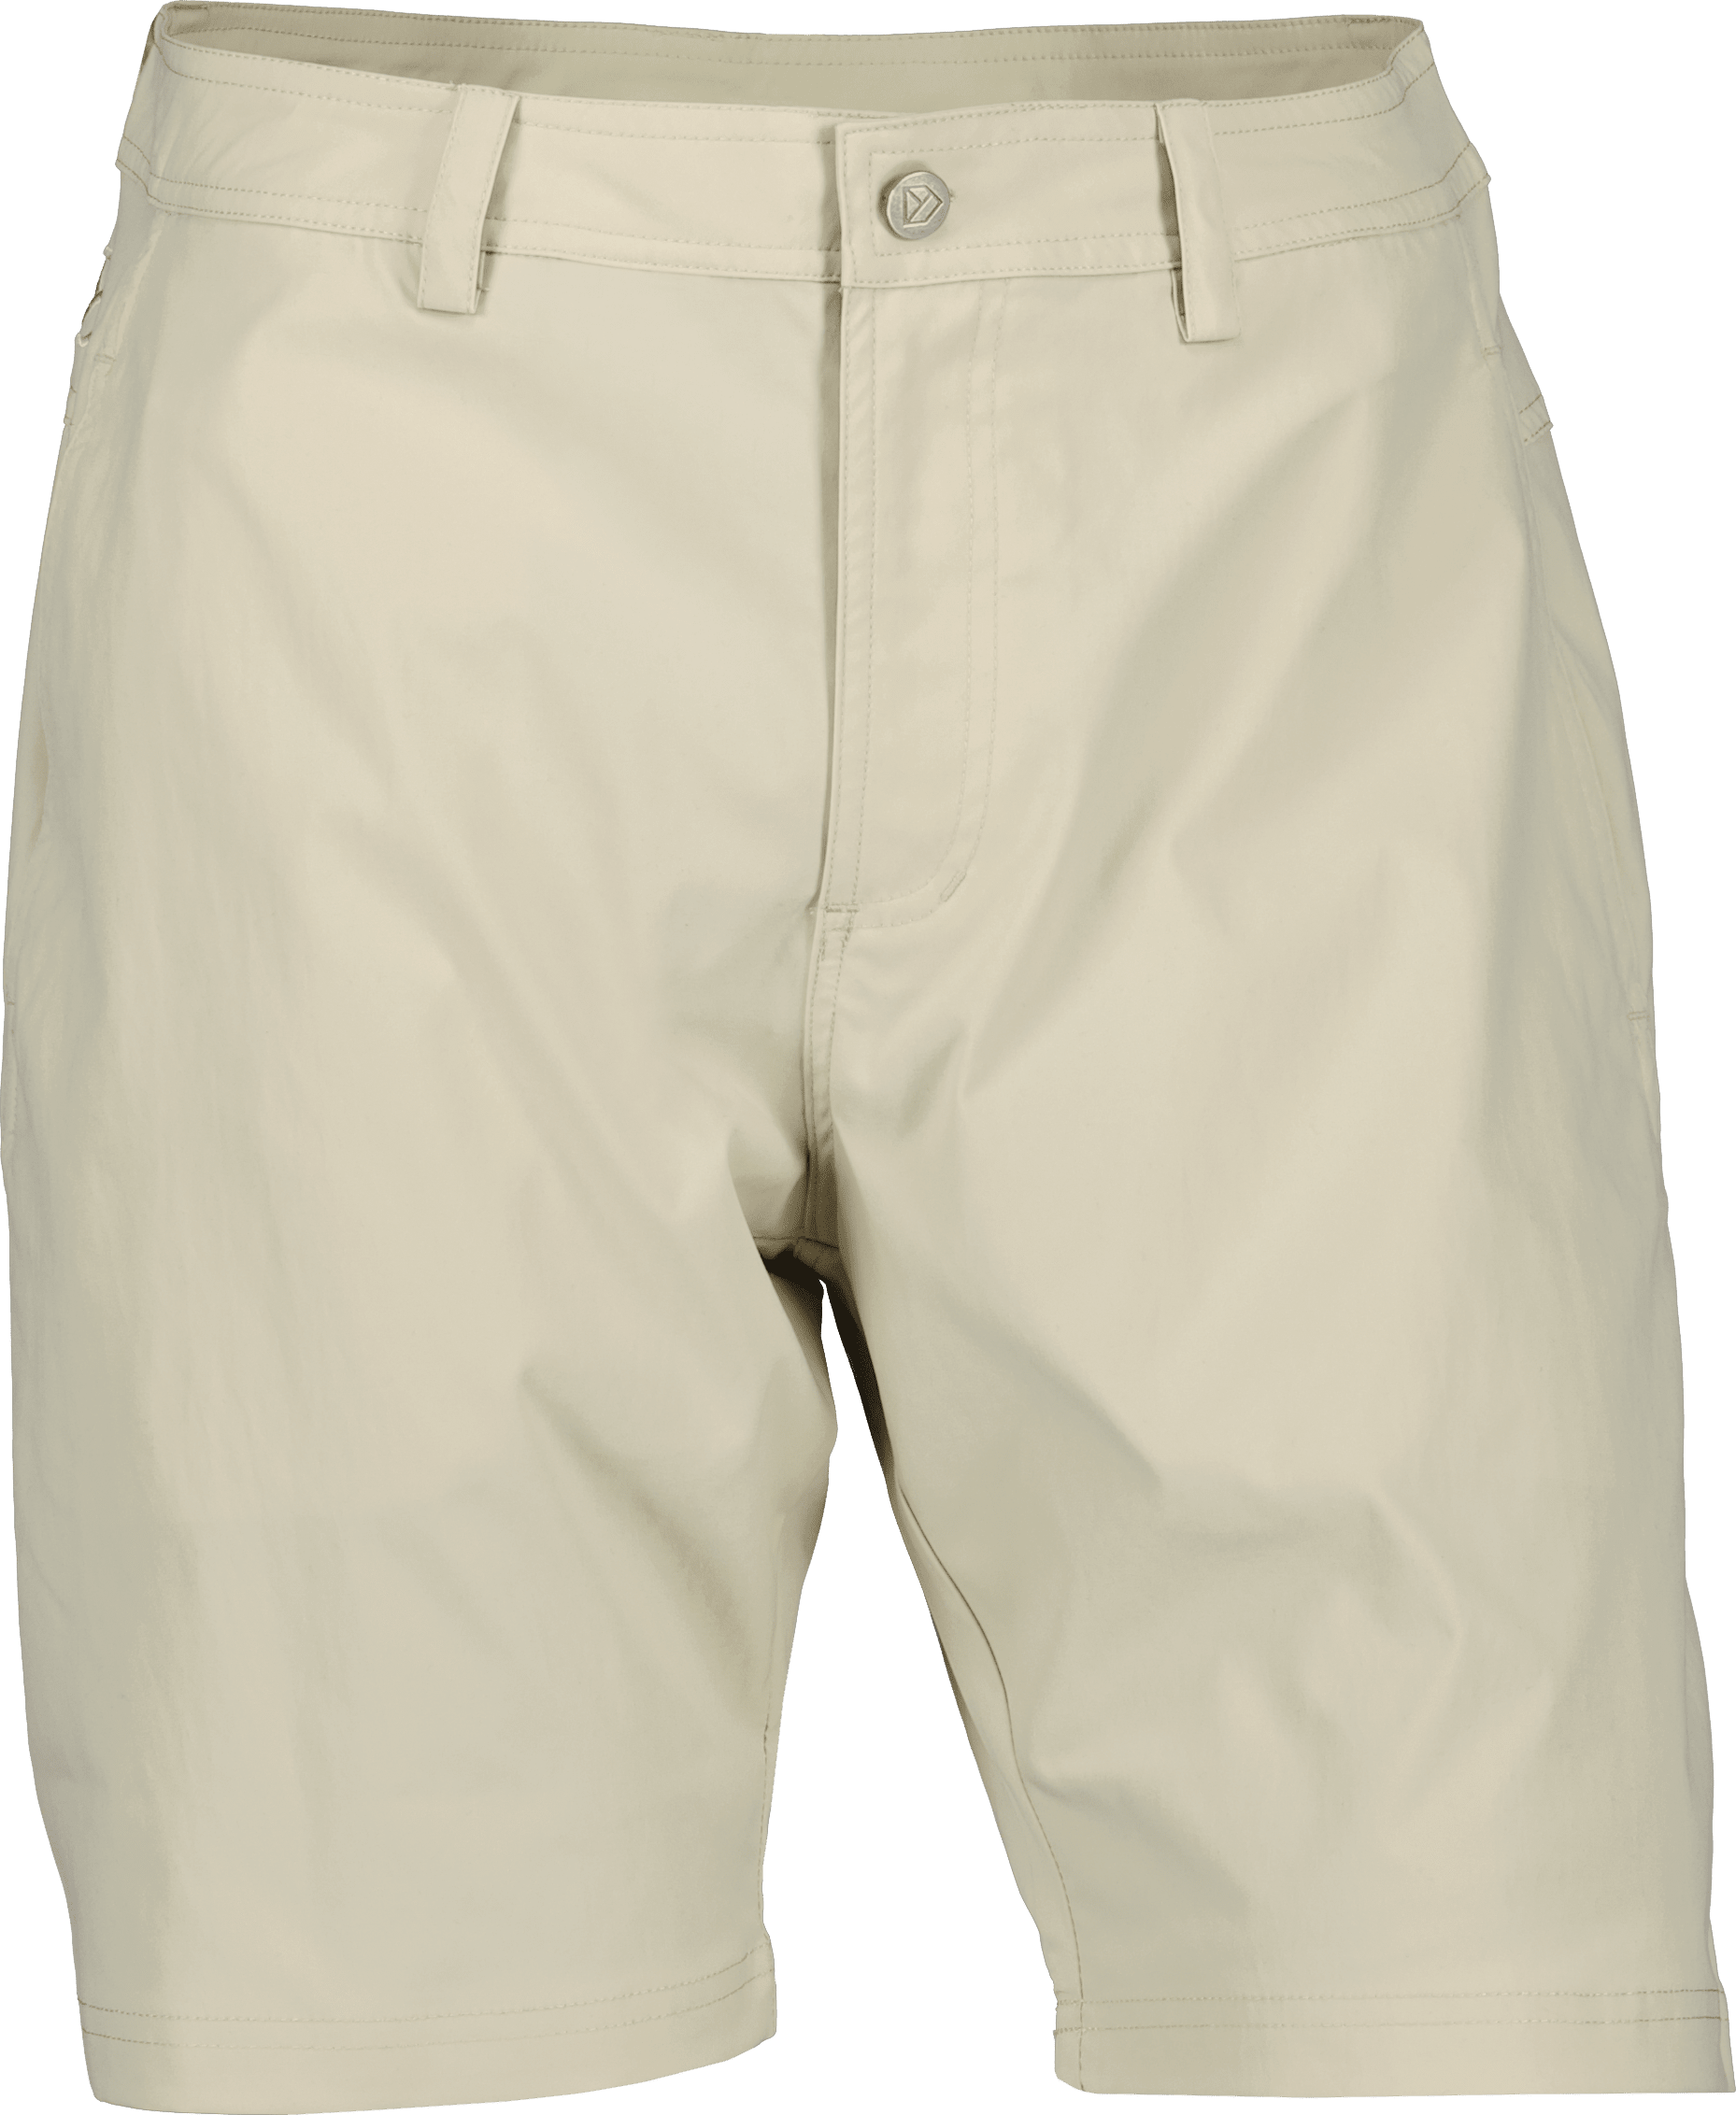 Buy Didriksons Men's Bräcke Shorts from Outnorth